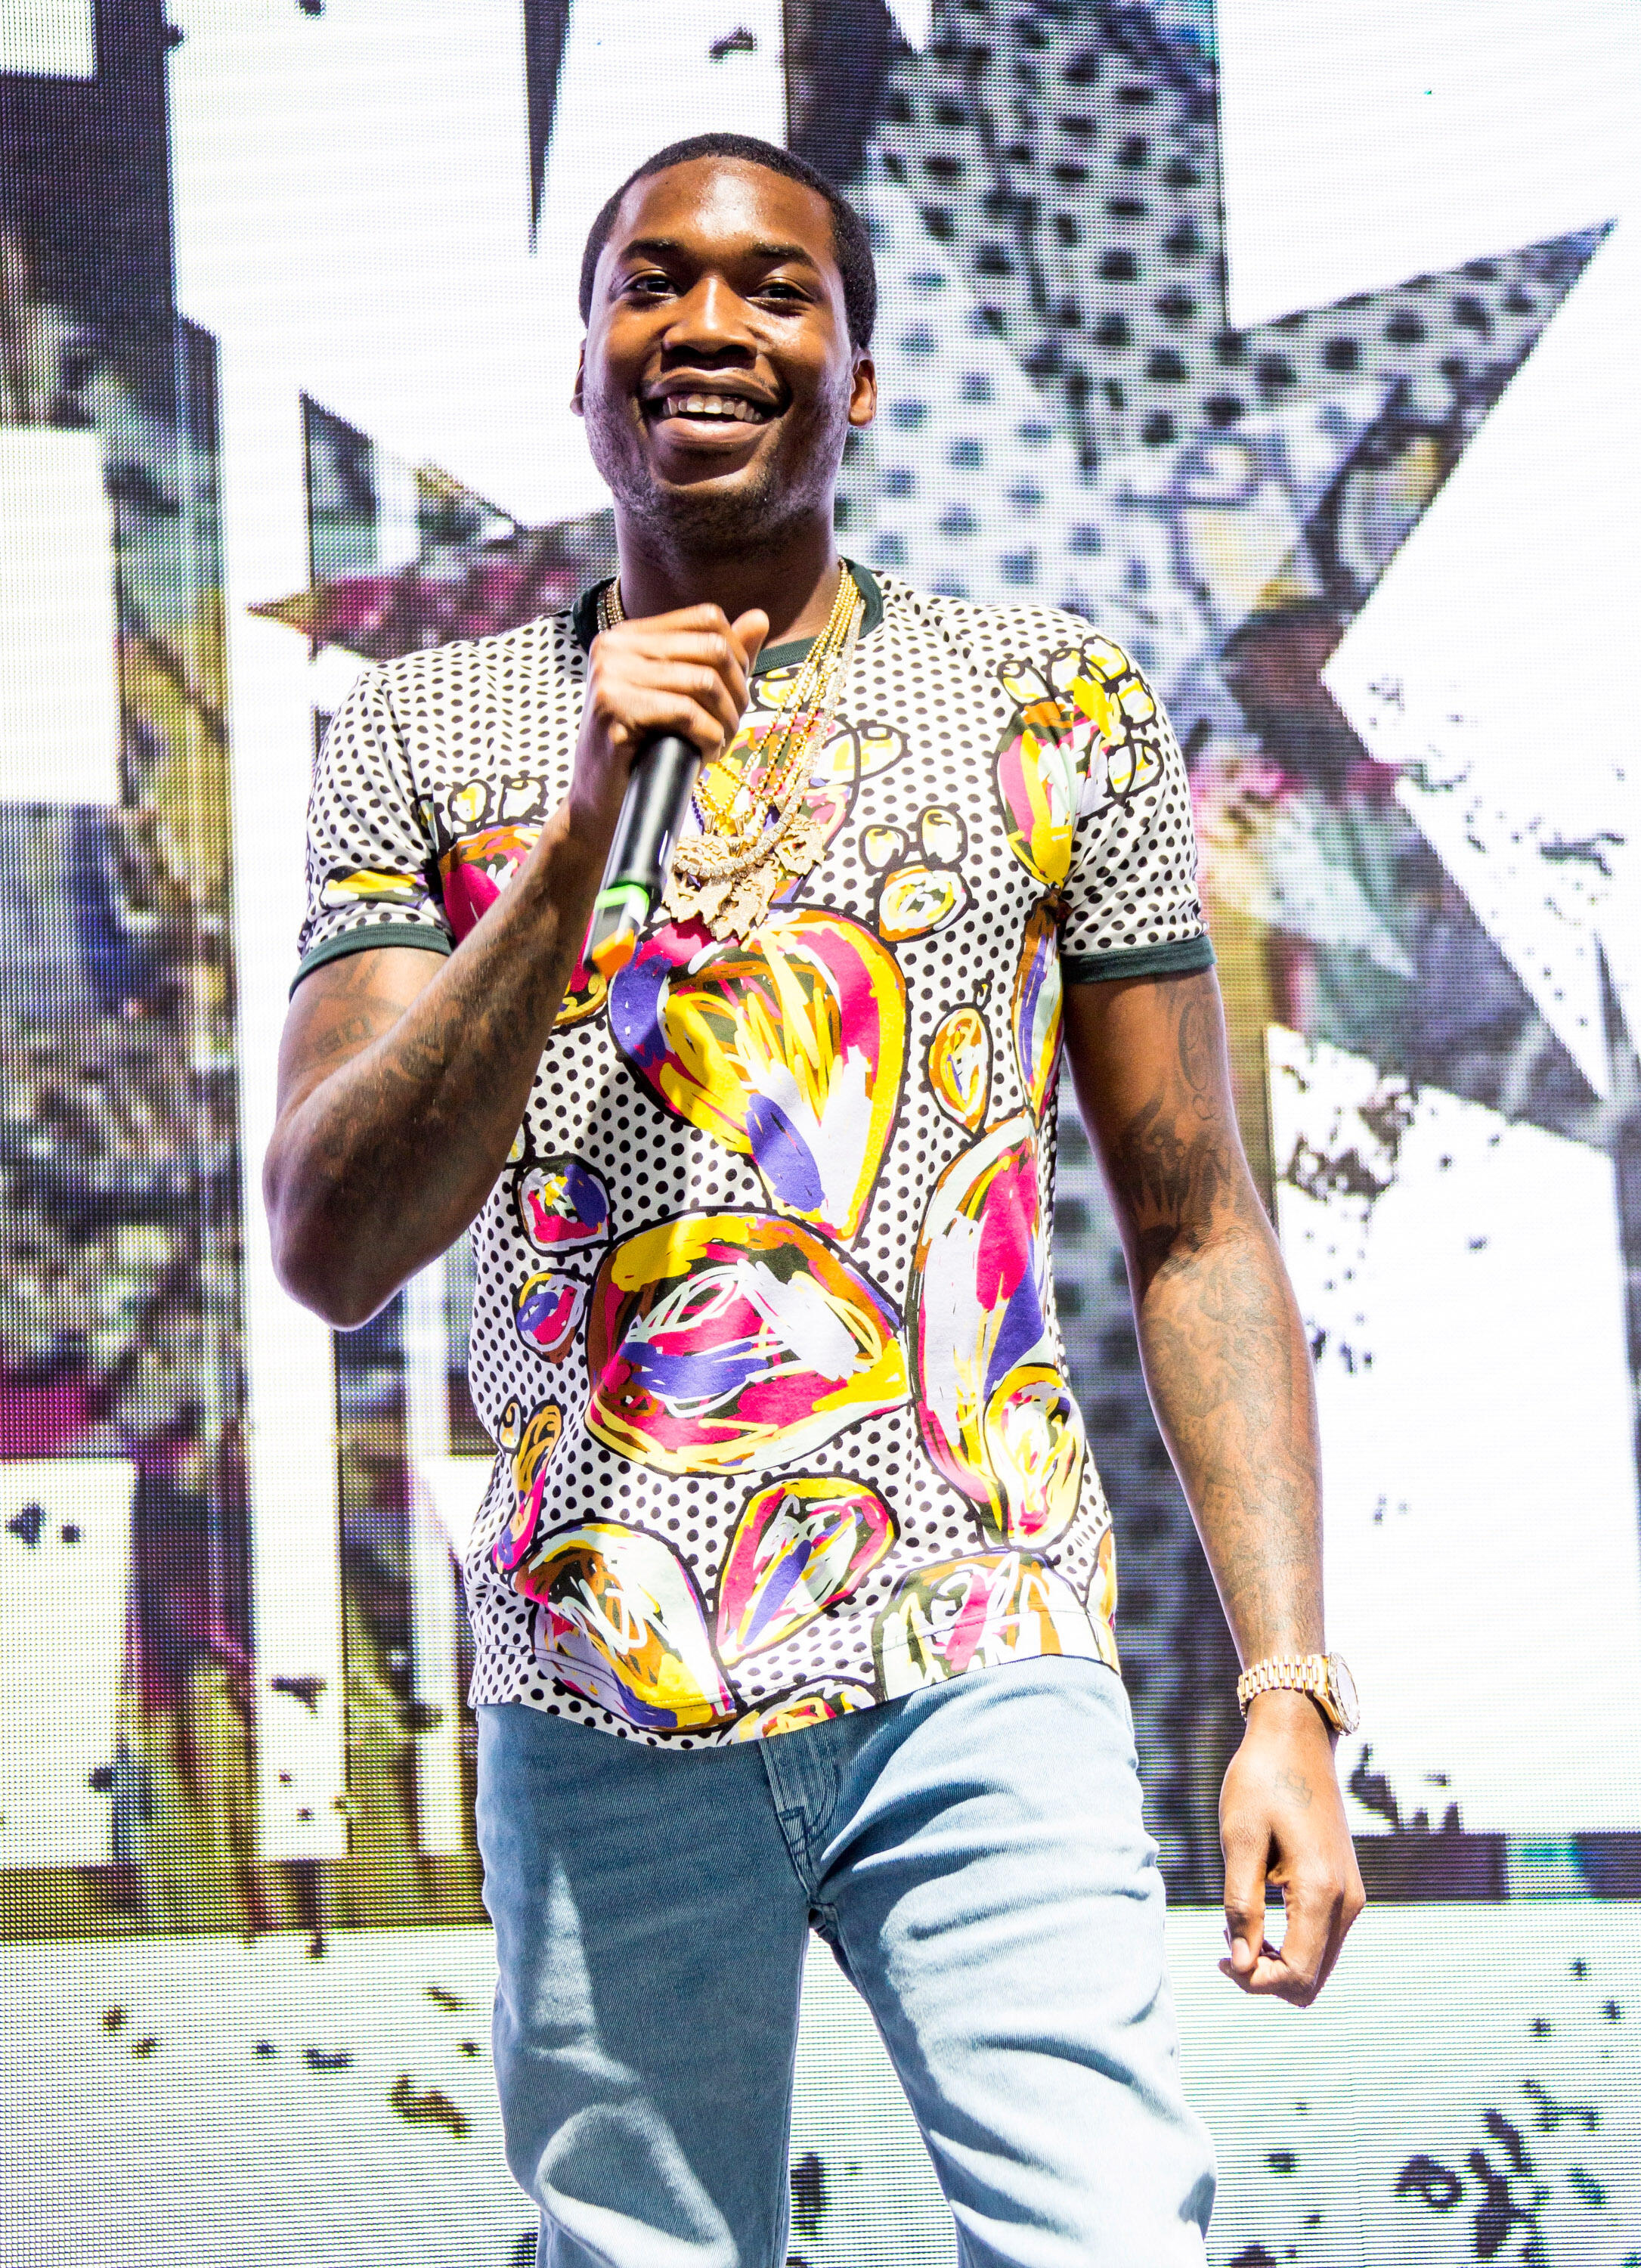 CLARKSTON, MI - JULY 31:  Rapper Meek Mill performs at DTE Energy Center during The Pinkprint Tour on July 31, 2015 in Clarkston, Michigan.  (Photo by Scott Legato/Getty Images)